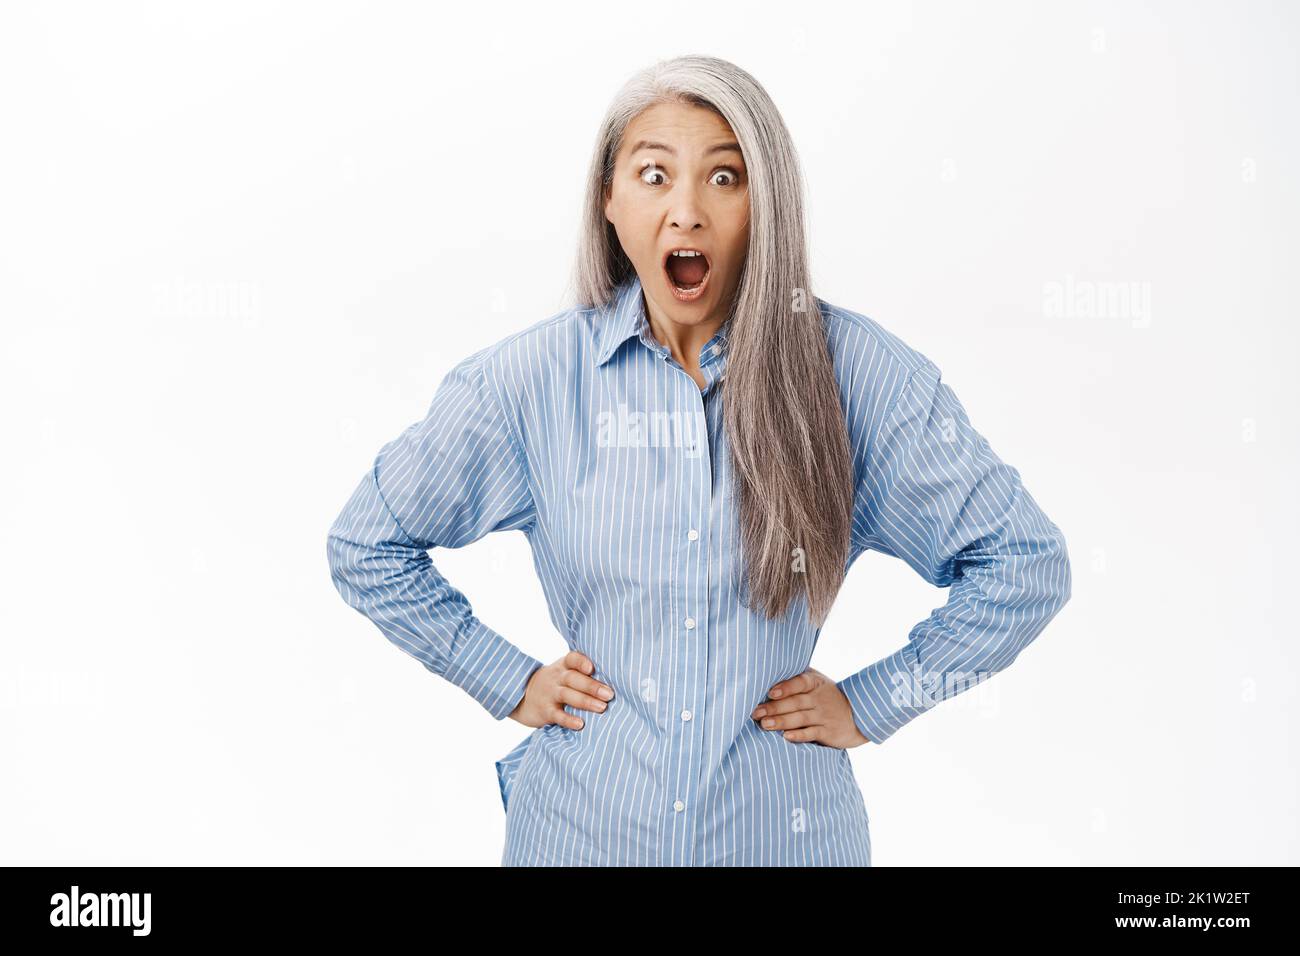 Impressed asian lady saying wow, looking amazed by smth, standing over white background. Stock Photo